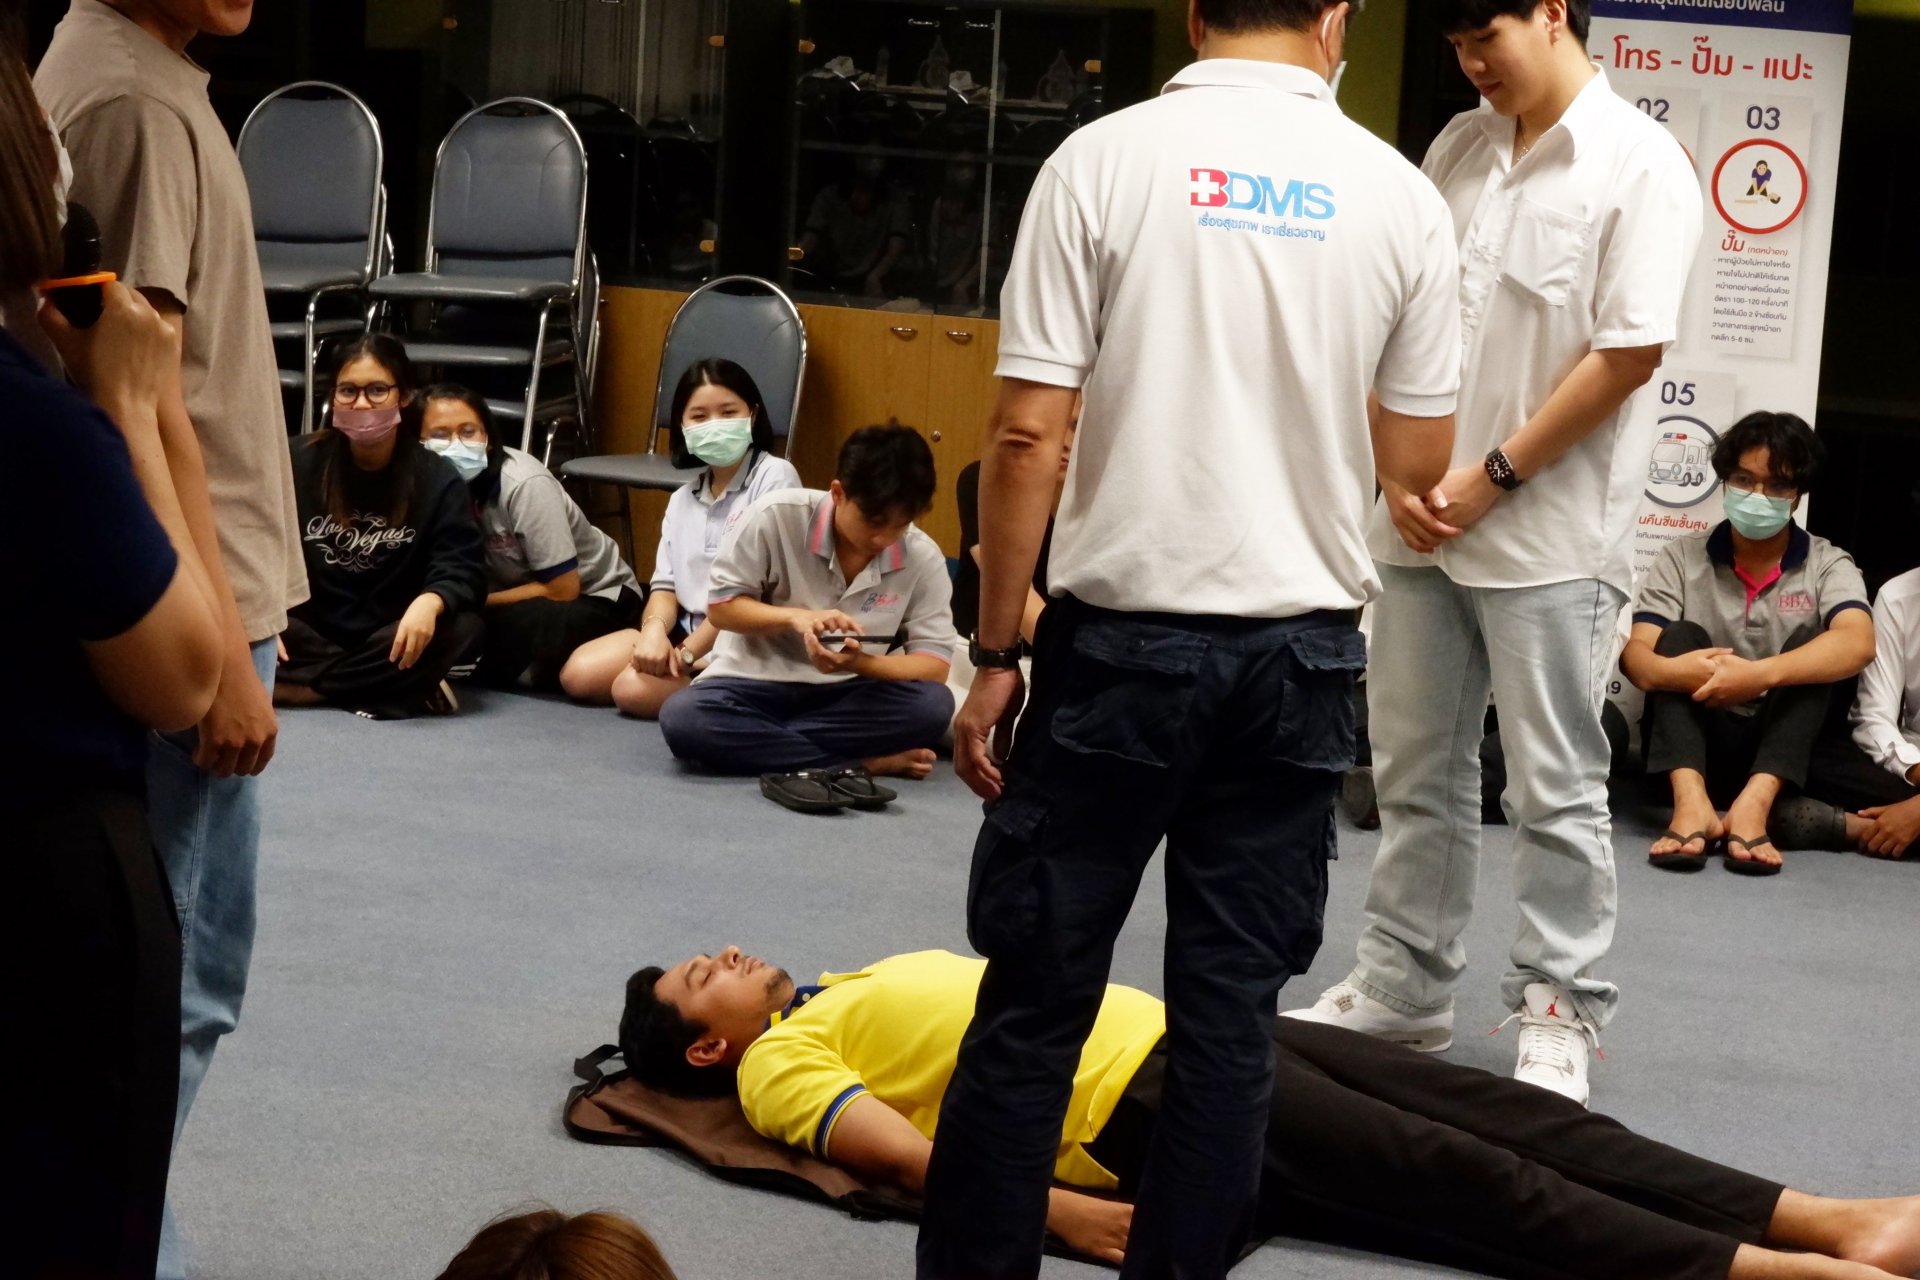 CPR and First Aid Training BBA63